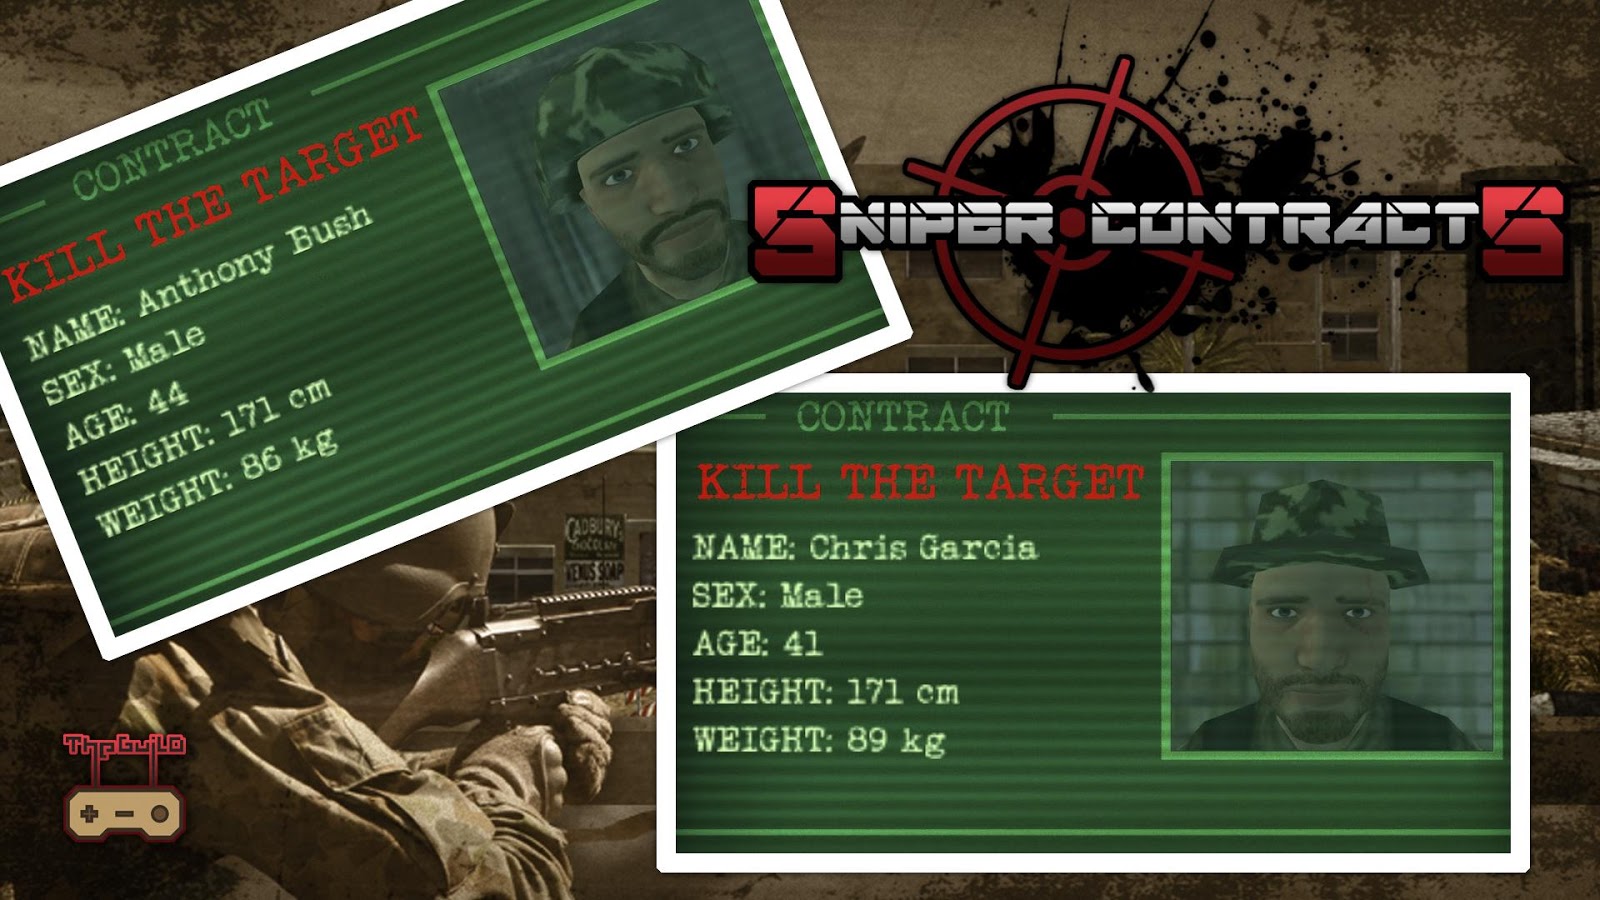 download sniper contracts 2